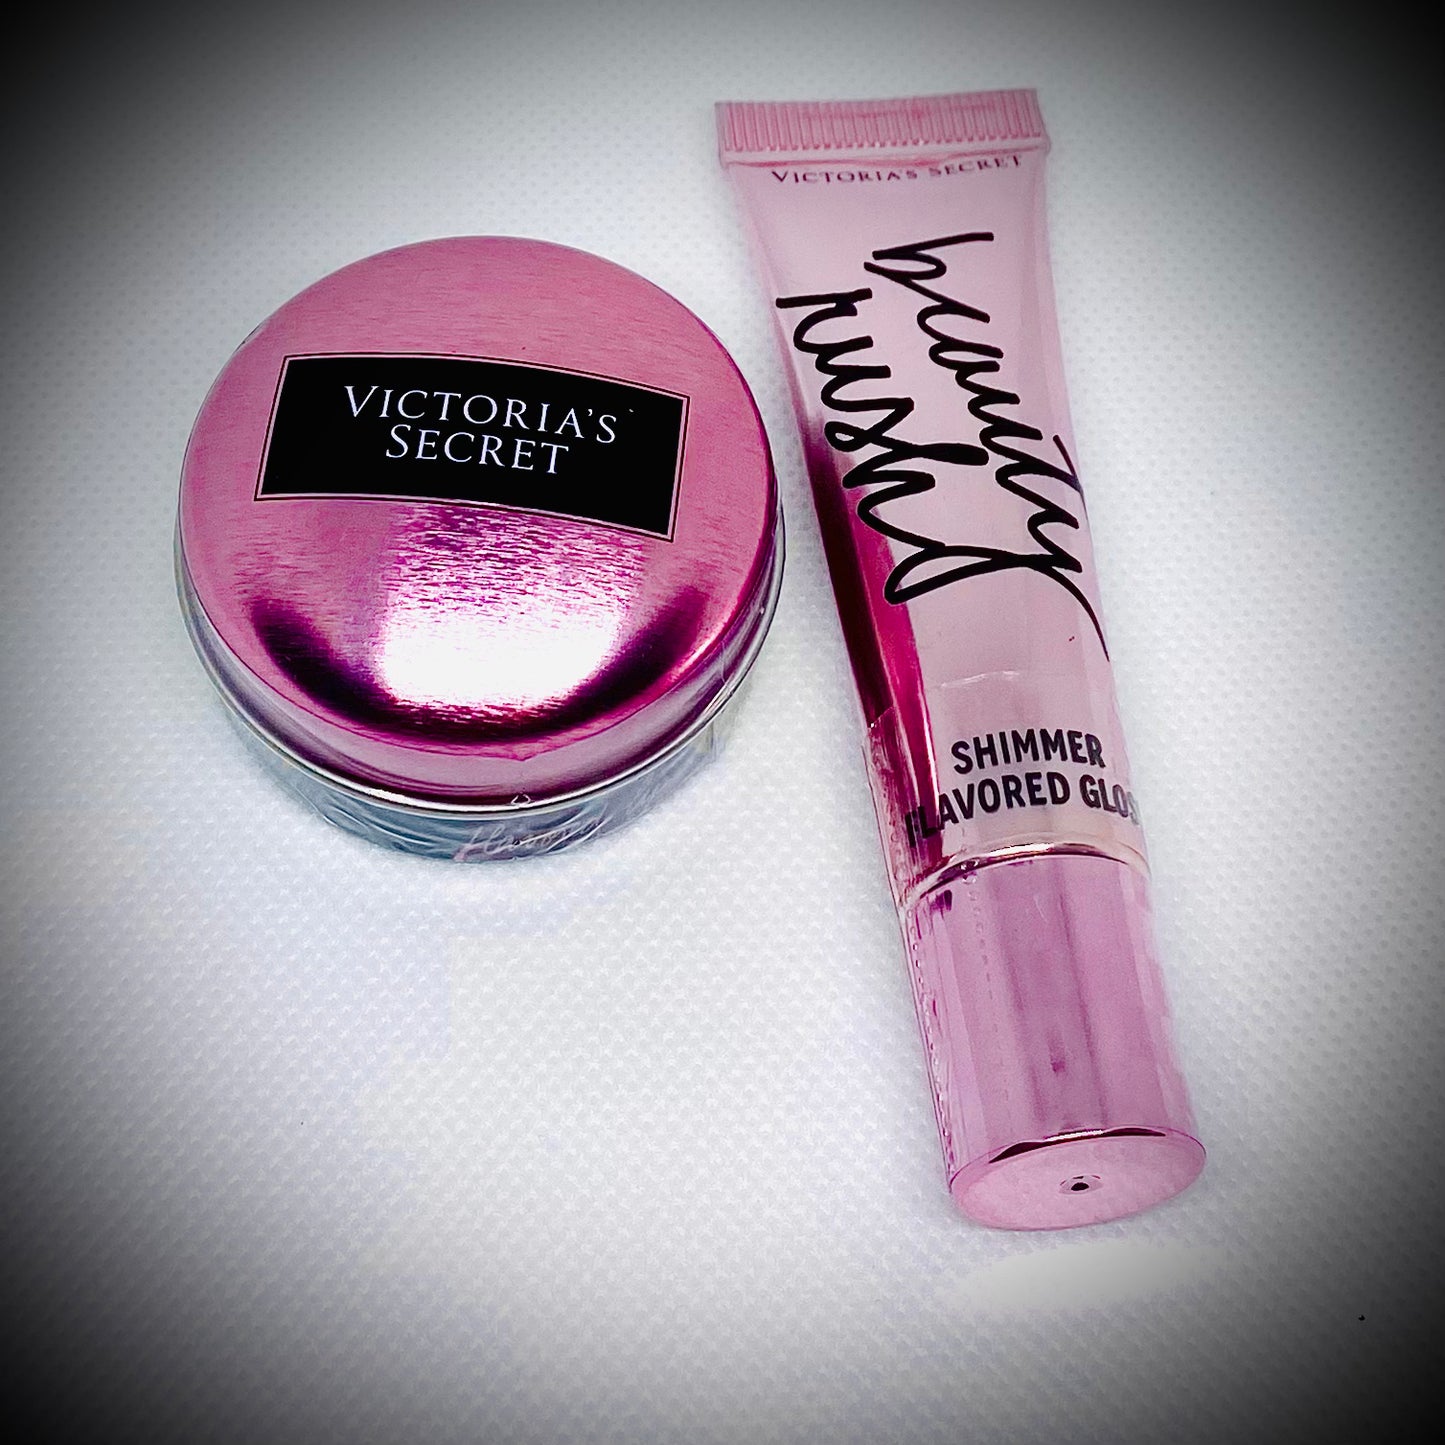 Victoria’s Secret Beauty Rush Lip Care Set - Shimmer Gloss and Scrub, Candy Flavor only available at Facetreasures or LadiesNGentz Boutique, Limited edition beauty bundle